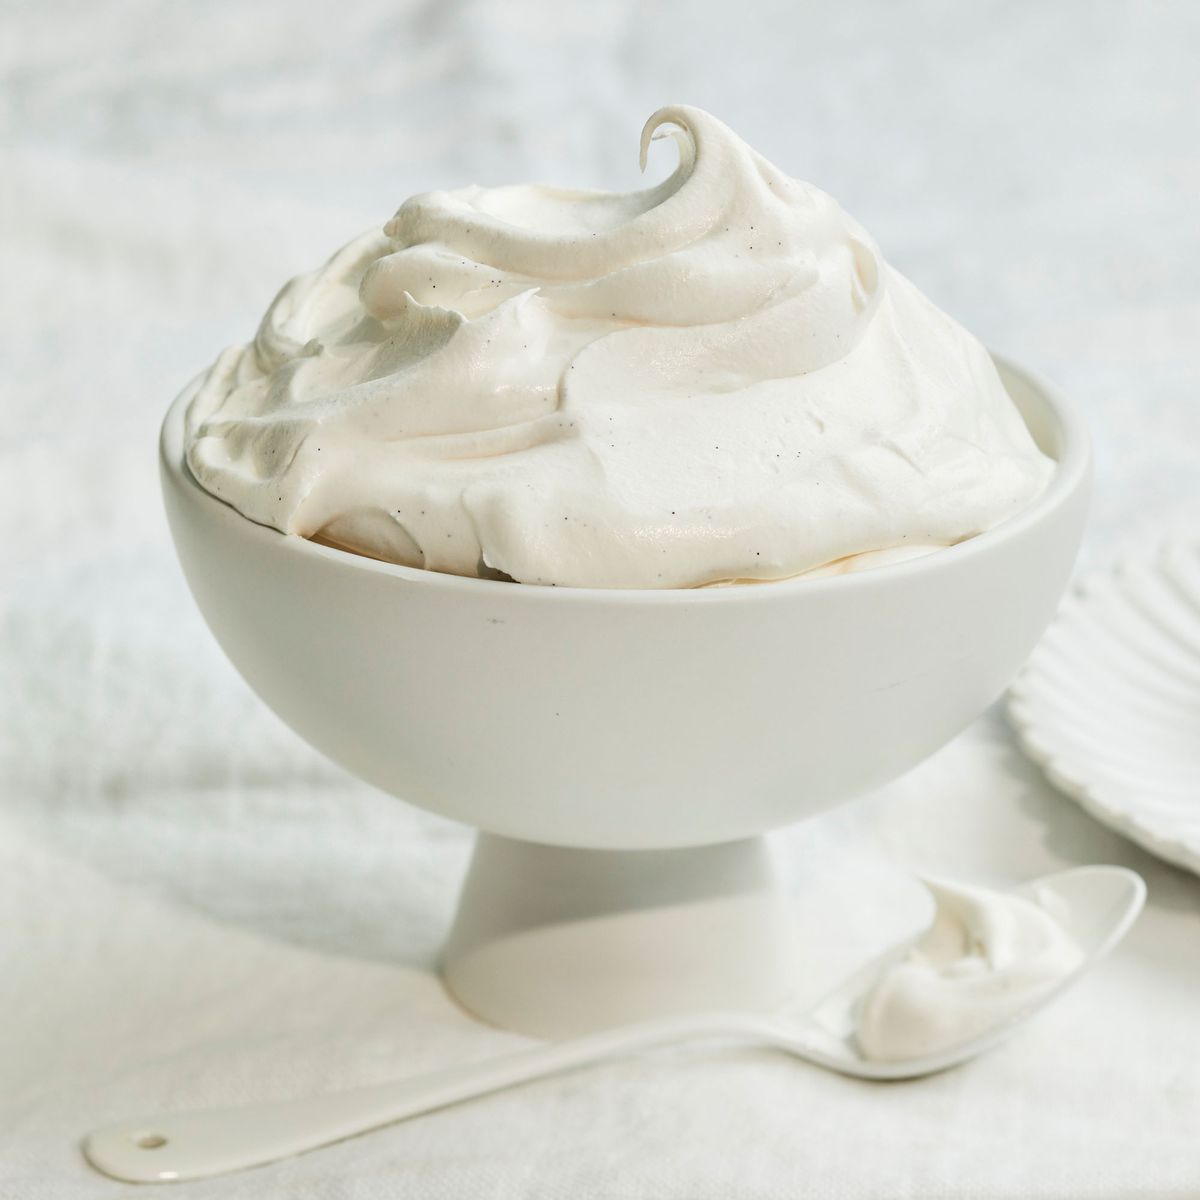 whipped cream in a white bowl